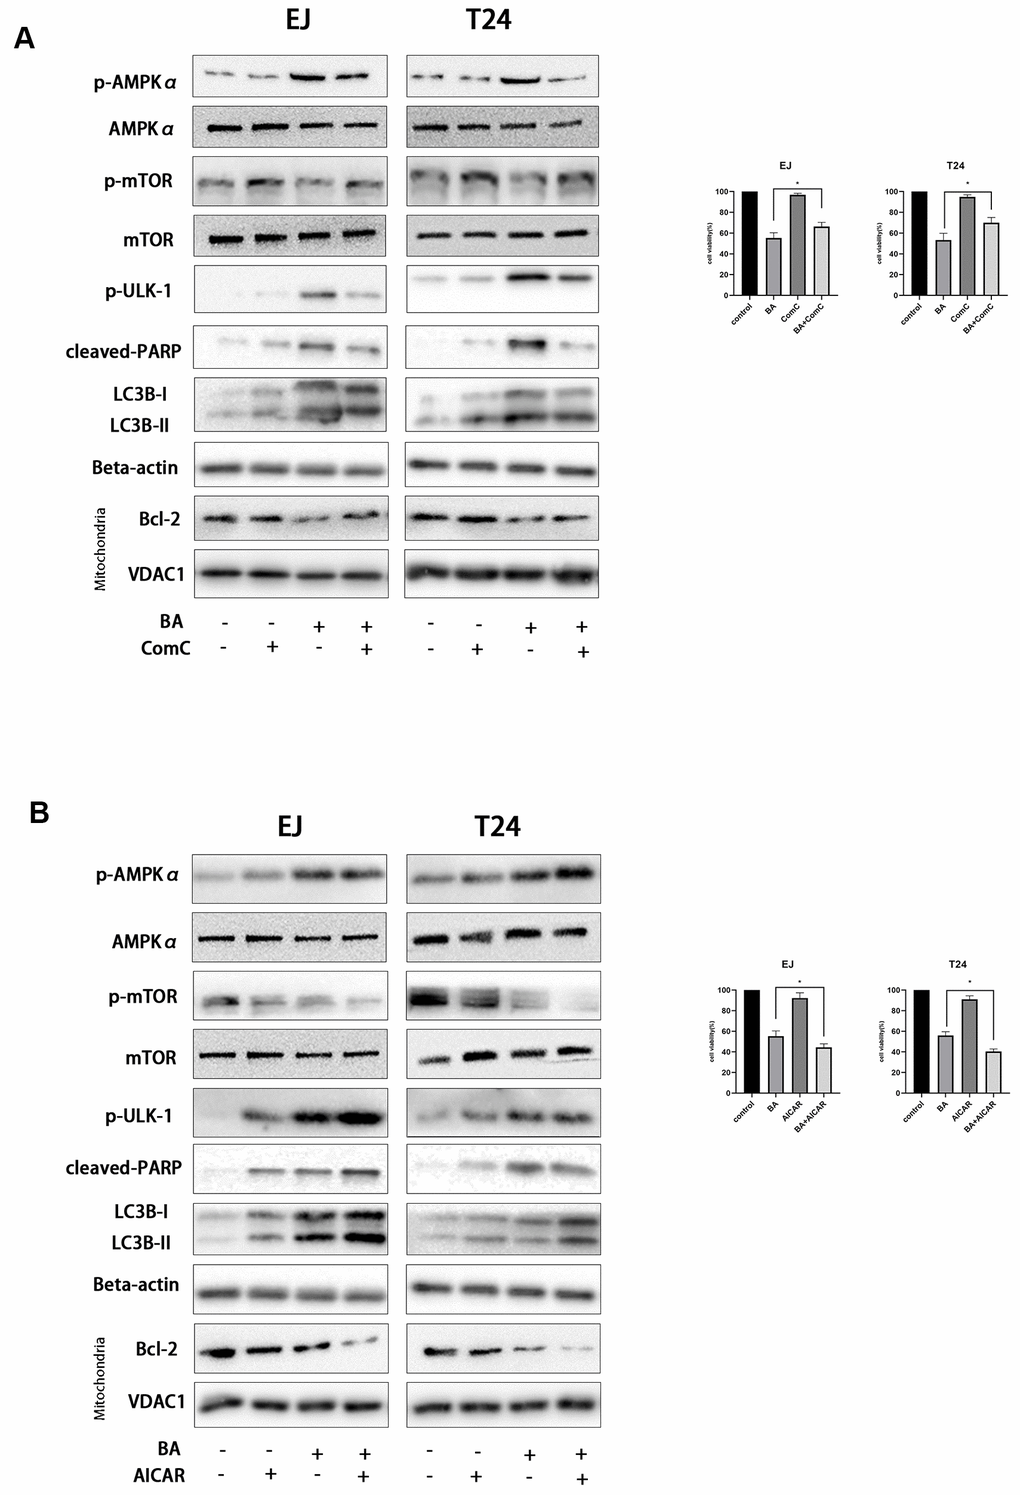 BA-triggered autophagy-dependent apoptosis requires activation of the AMPK-mTOR-ULK1 axis. Cell viability and western blot assay results for EJ and T24 cells pre-exposed to 10 μM dorsomorphin (ComC) (A) or 500 μM AICAR (B) for 4 h and incubated with DMSO (control) or 25 μM BA for another 24 h. The CCK-8 assay was used for analysis of cell viability. Western blot was employed to determine the expression of cleaved PARP, p-AMPKα (Thr172), p-mTOR (Ser2448), p-ULK1 (Ser555), Bcl-2, cleaved caspase-3, and LC3B-II. *pp